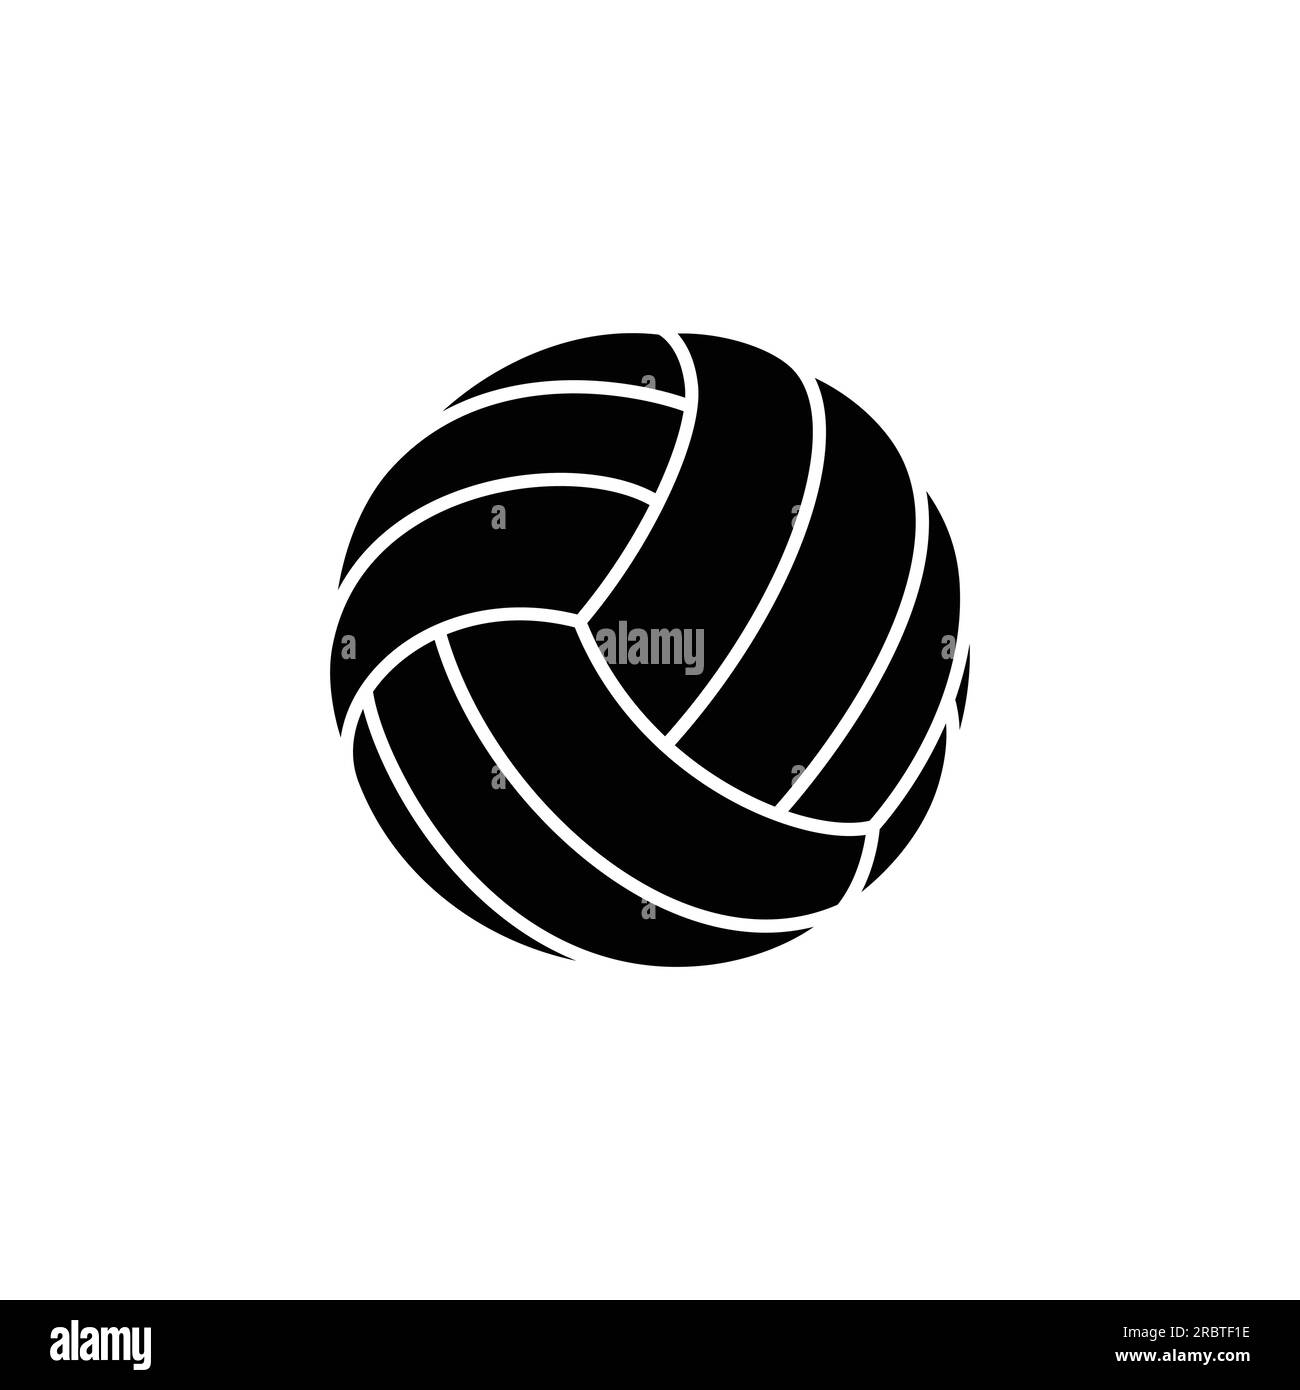 simple classic black volleyball ball silhouette symbol logo vector ...